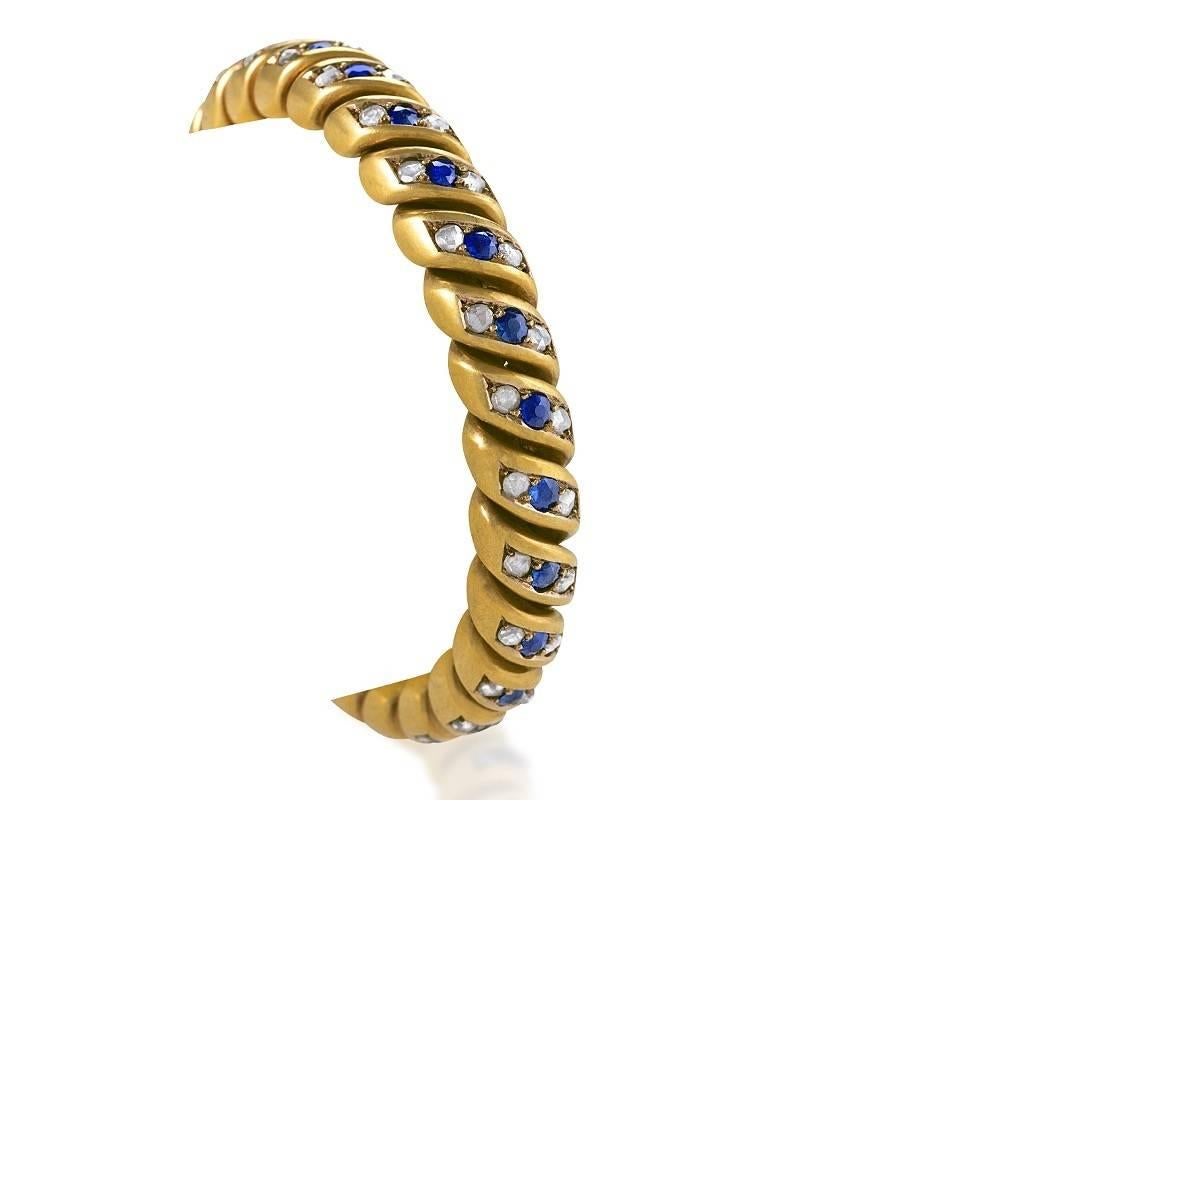 An English Antique 18 karat bloomed gold bracelet with sapphires and diamonds. The bracelet has 25 old round cut sapphires with an approximate total weight of 2.50 carats, and 50 rose cut diamonds with an approximate total weight of 2.50 carats. The